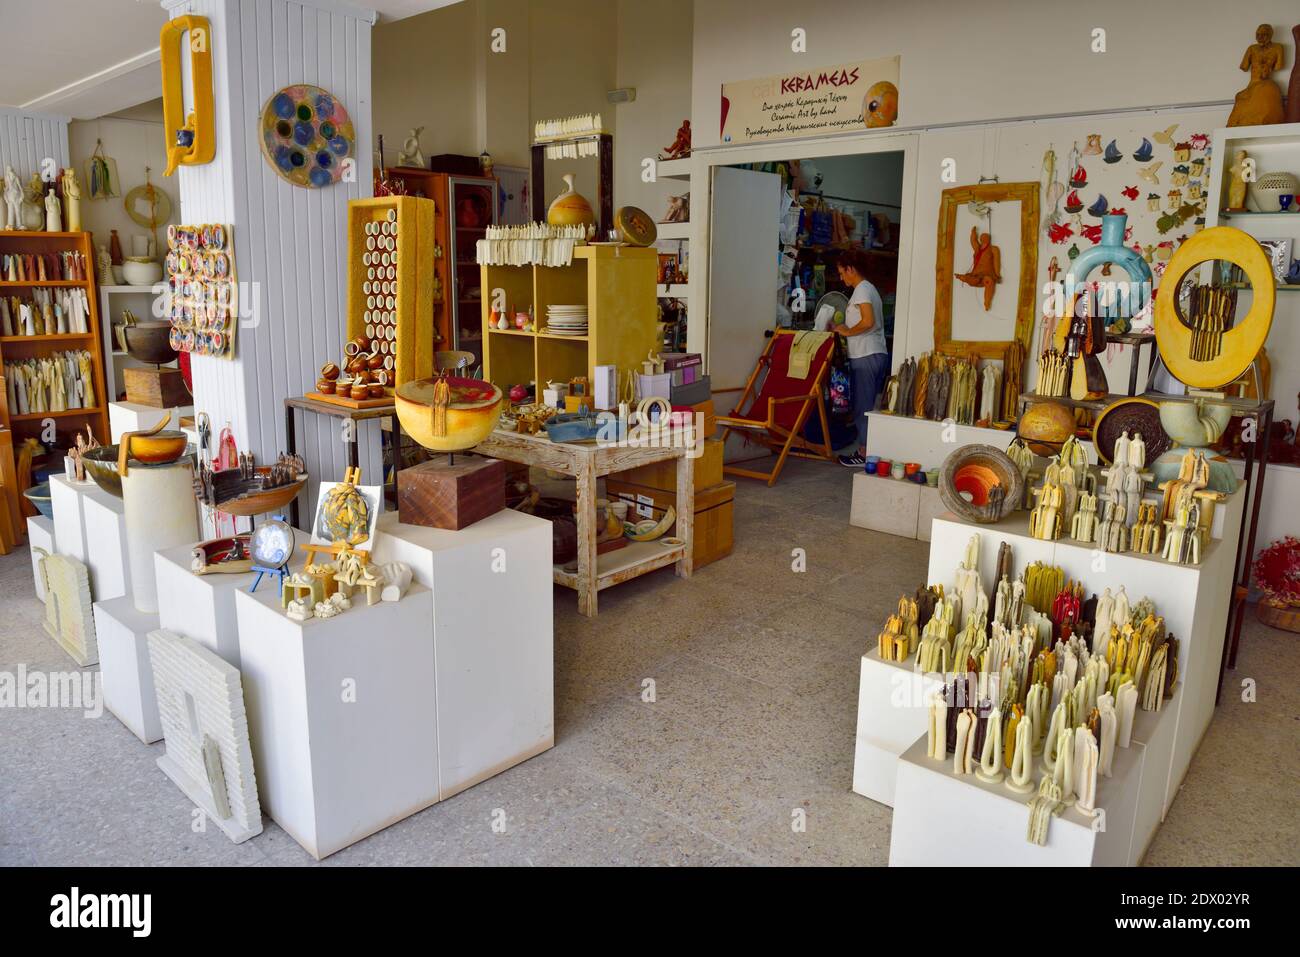 Inside CAT Kerameas Ceramics shop which has the artists workshop in back, Limassol, Cyprus Stock Photo